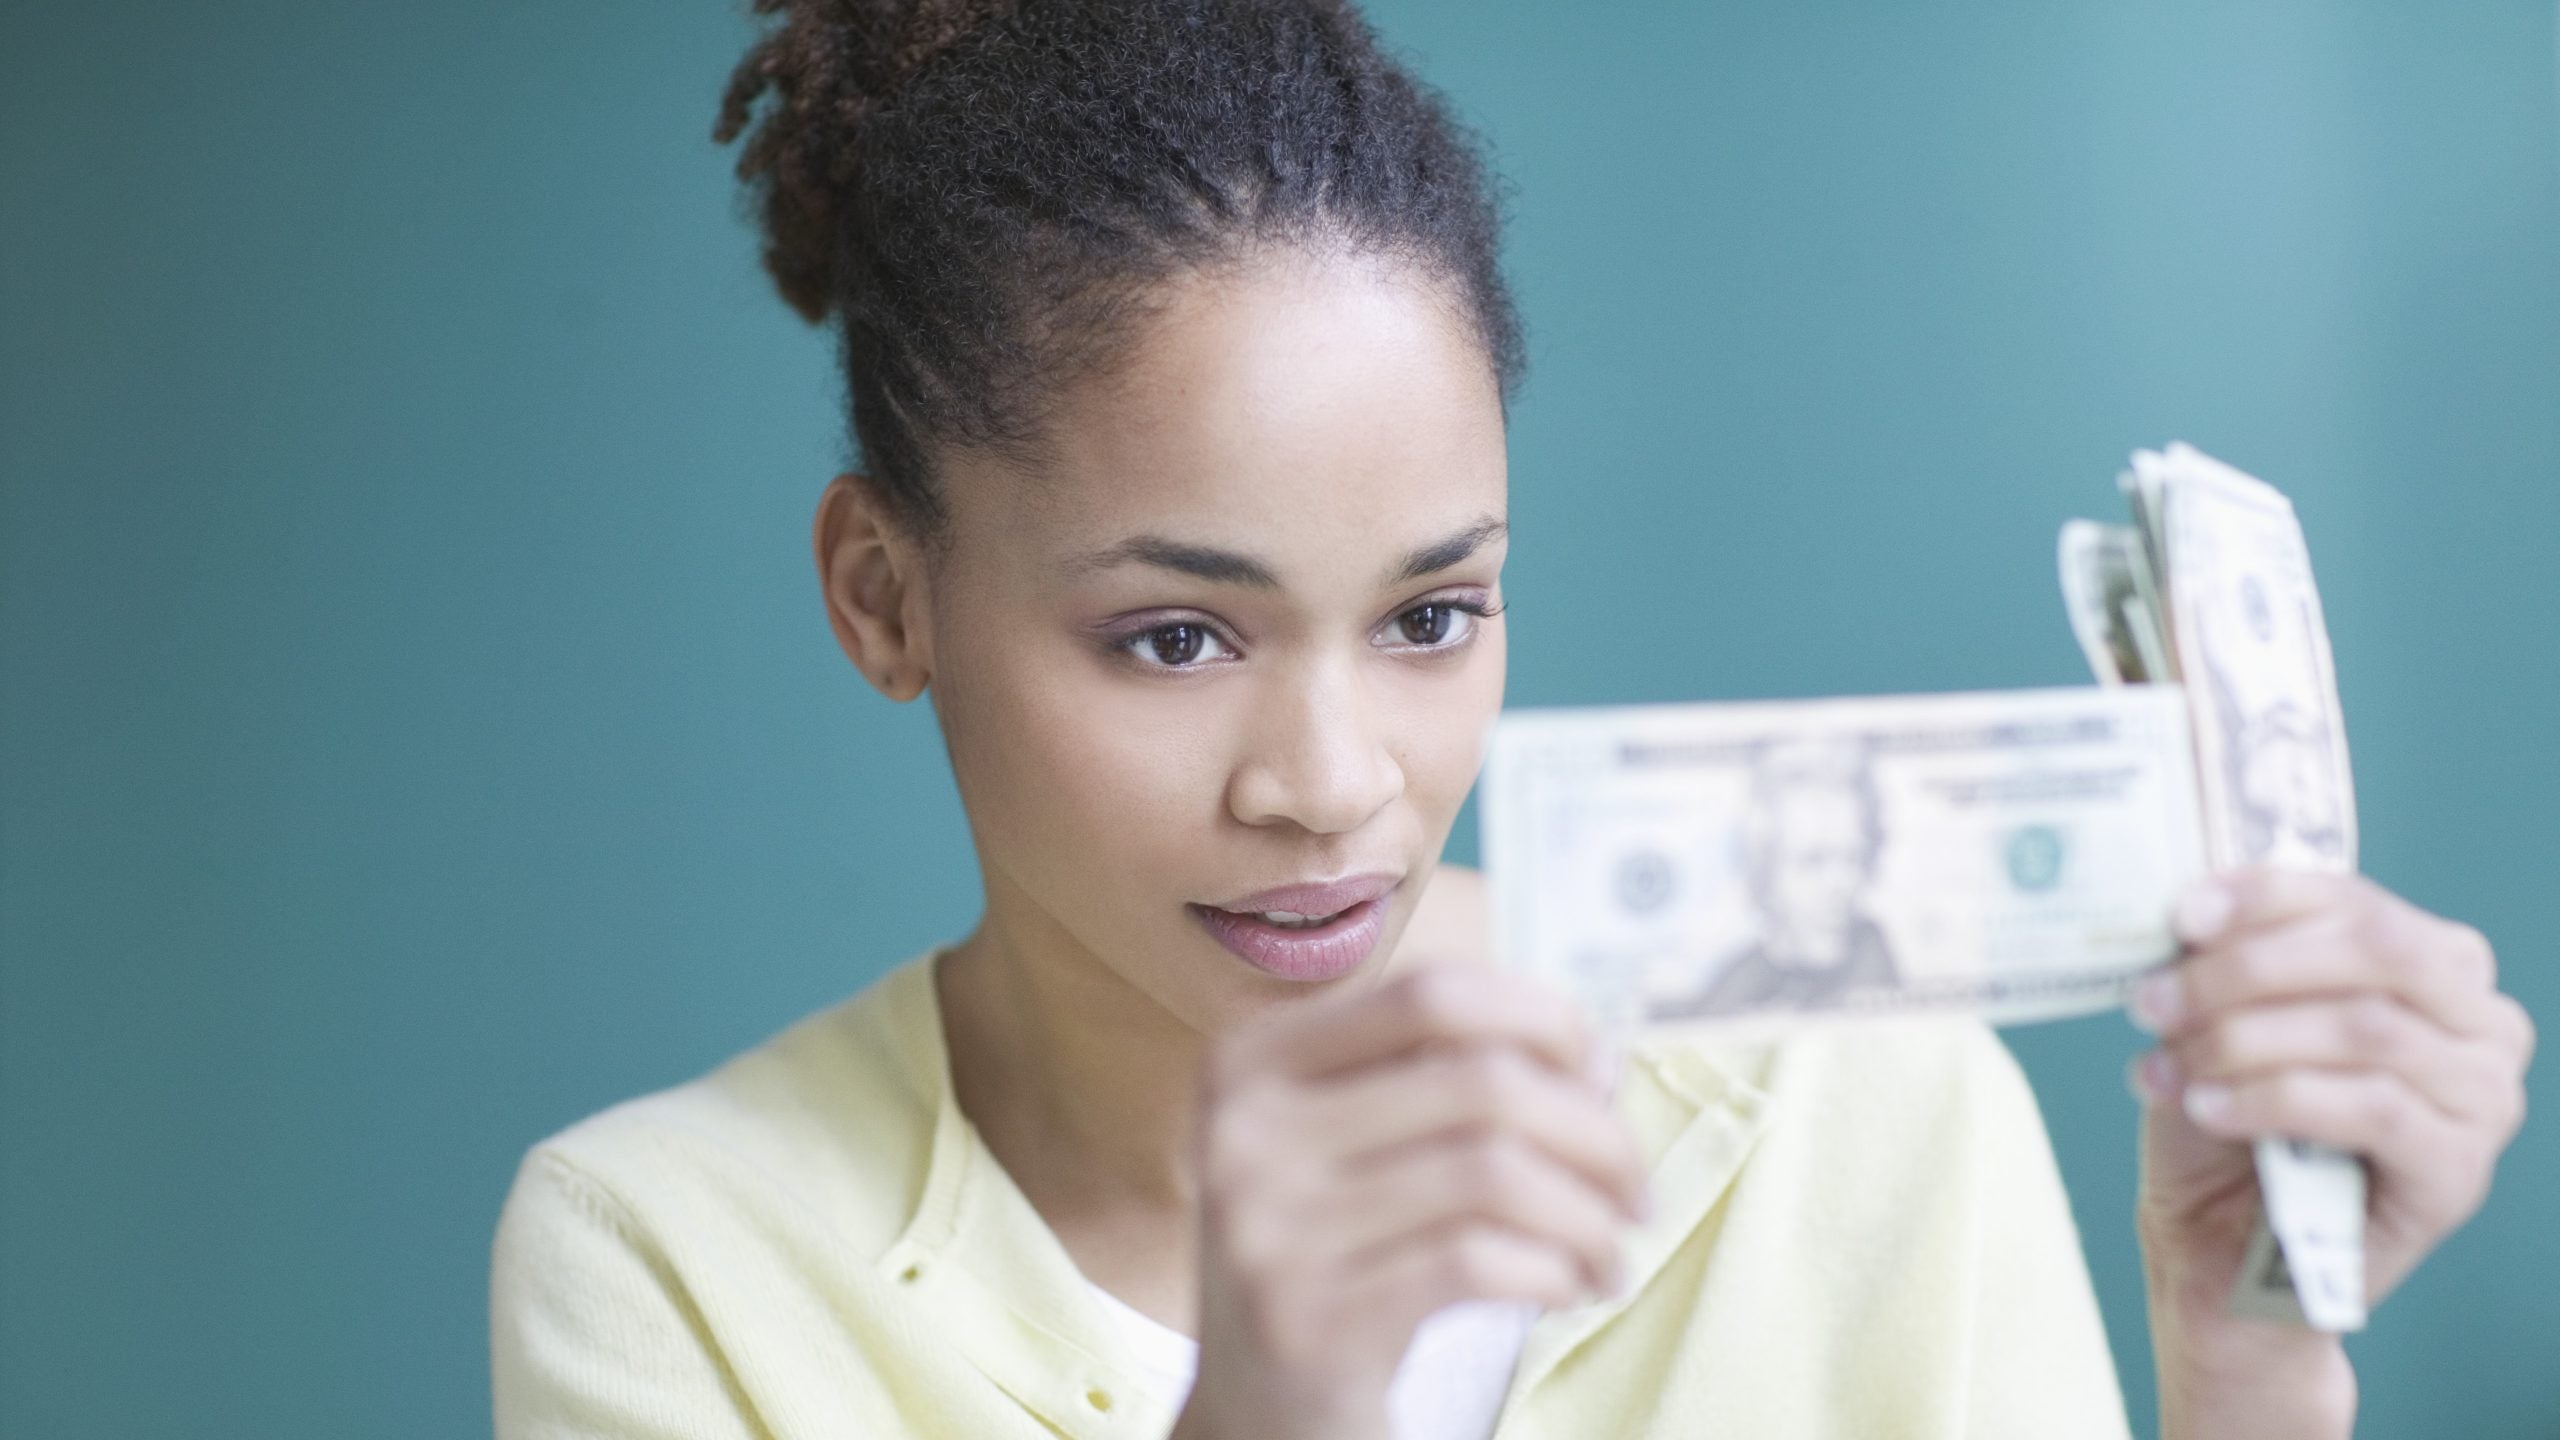 Break Up With These Money Habits To Achieve Financial Success